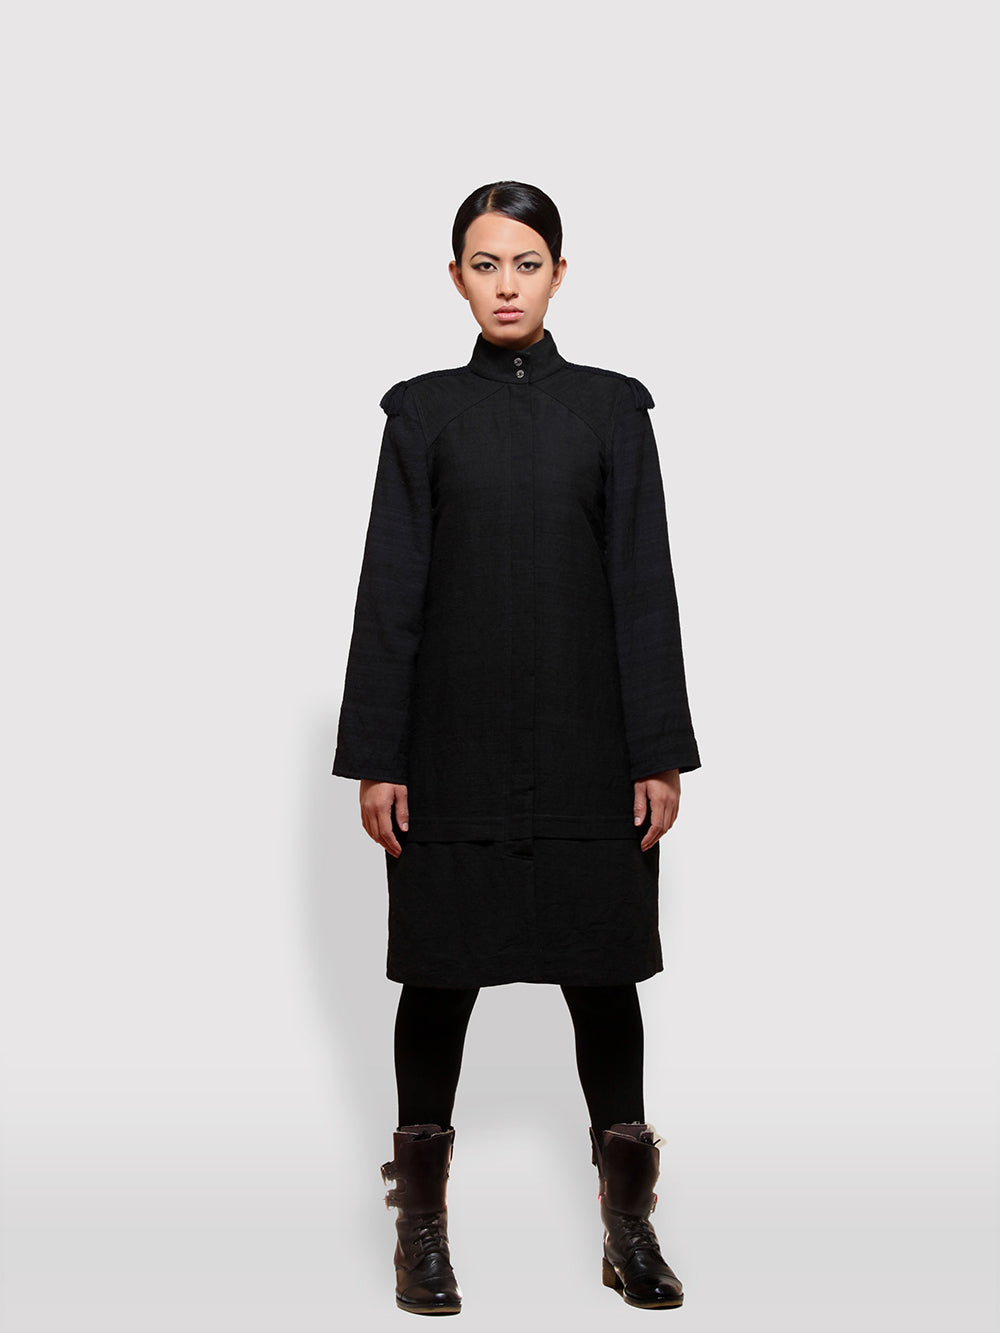 Braided Shoulder Overcoat made from handwoven mulberry and Eri silk designed by Khumanthem Atelier